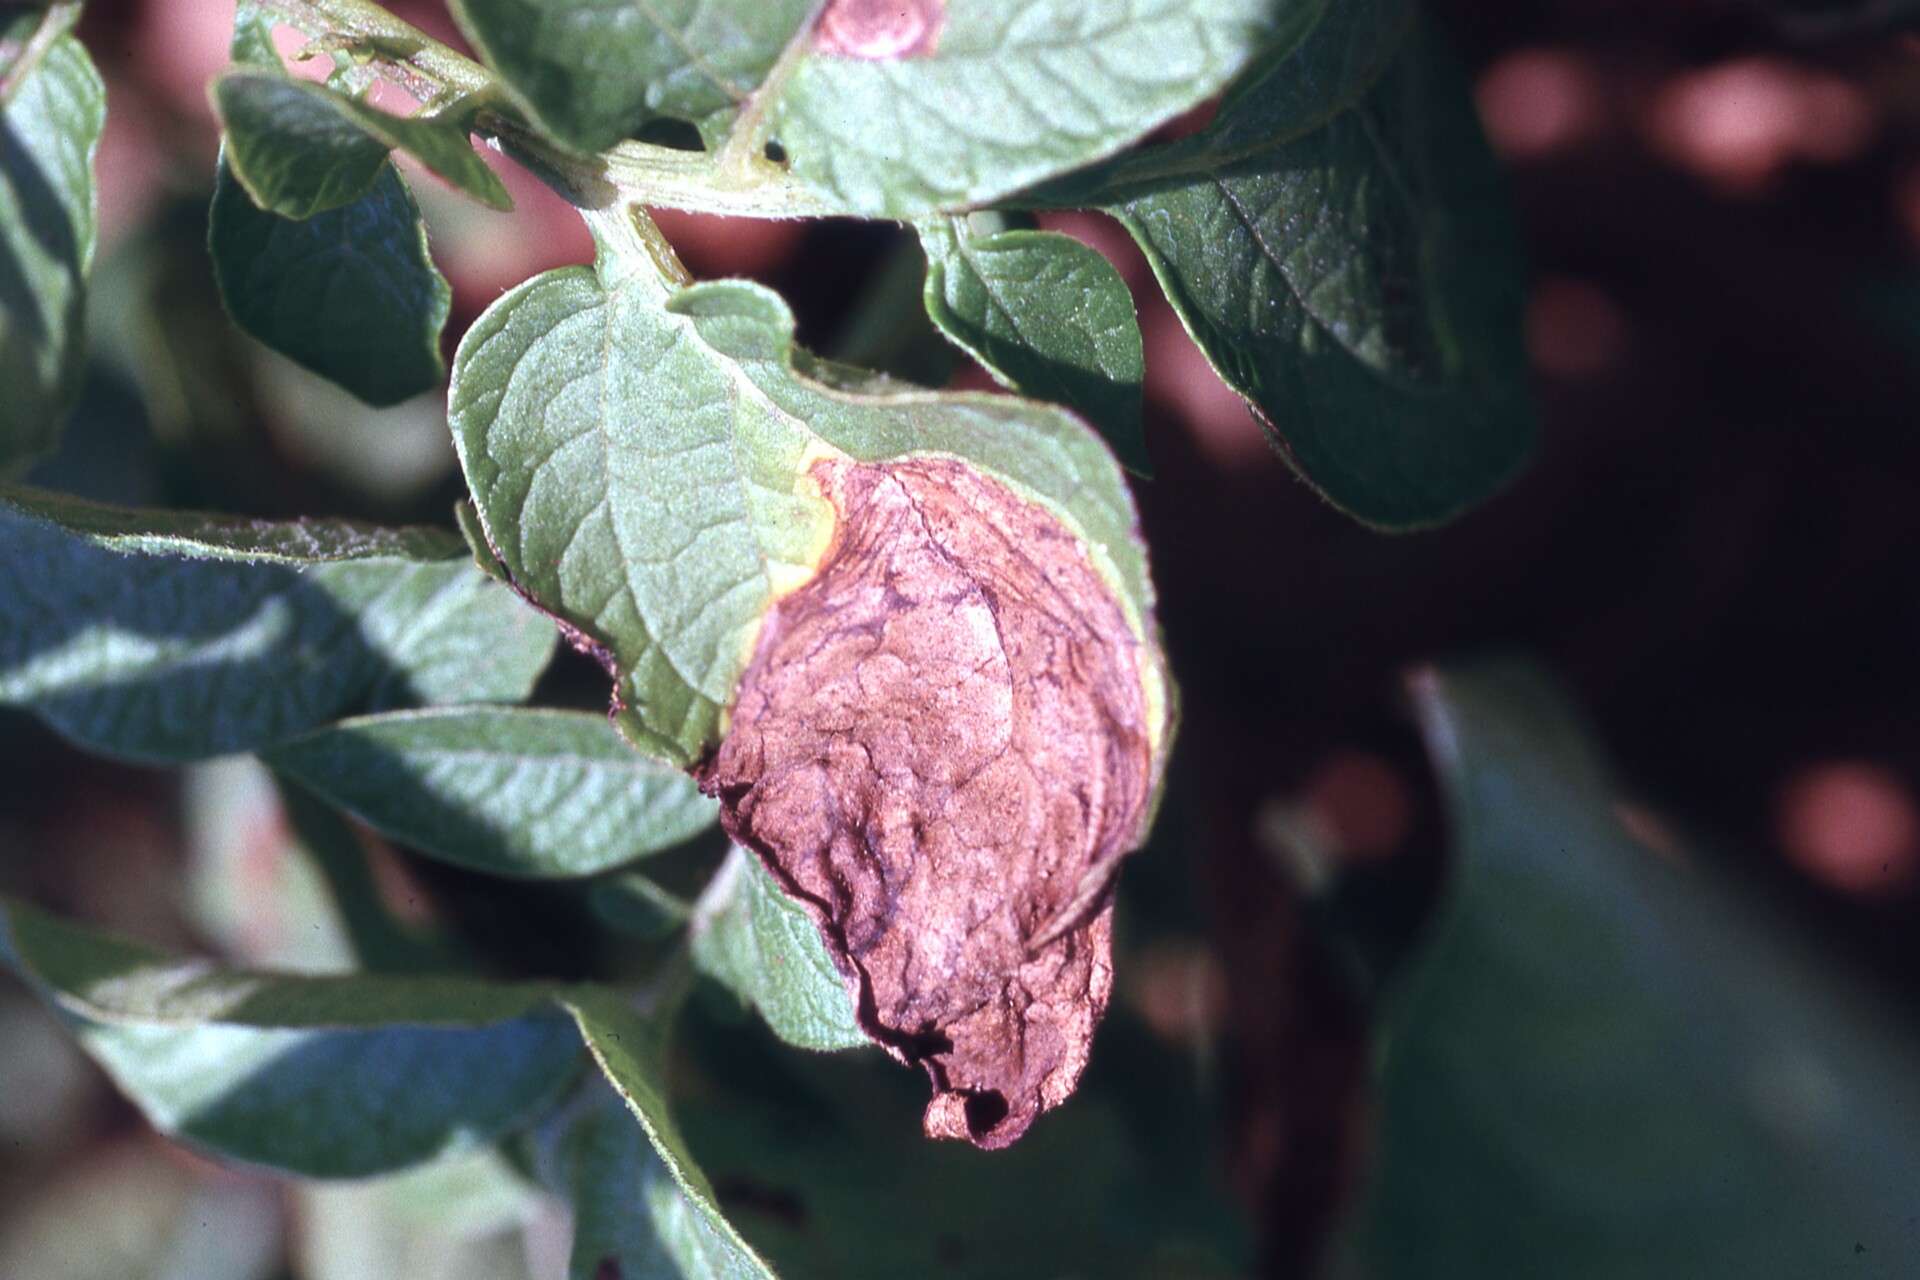 Figure 4. Lesion on leaf caused by late blight of potato.